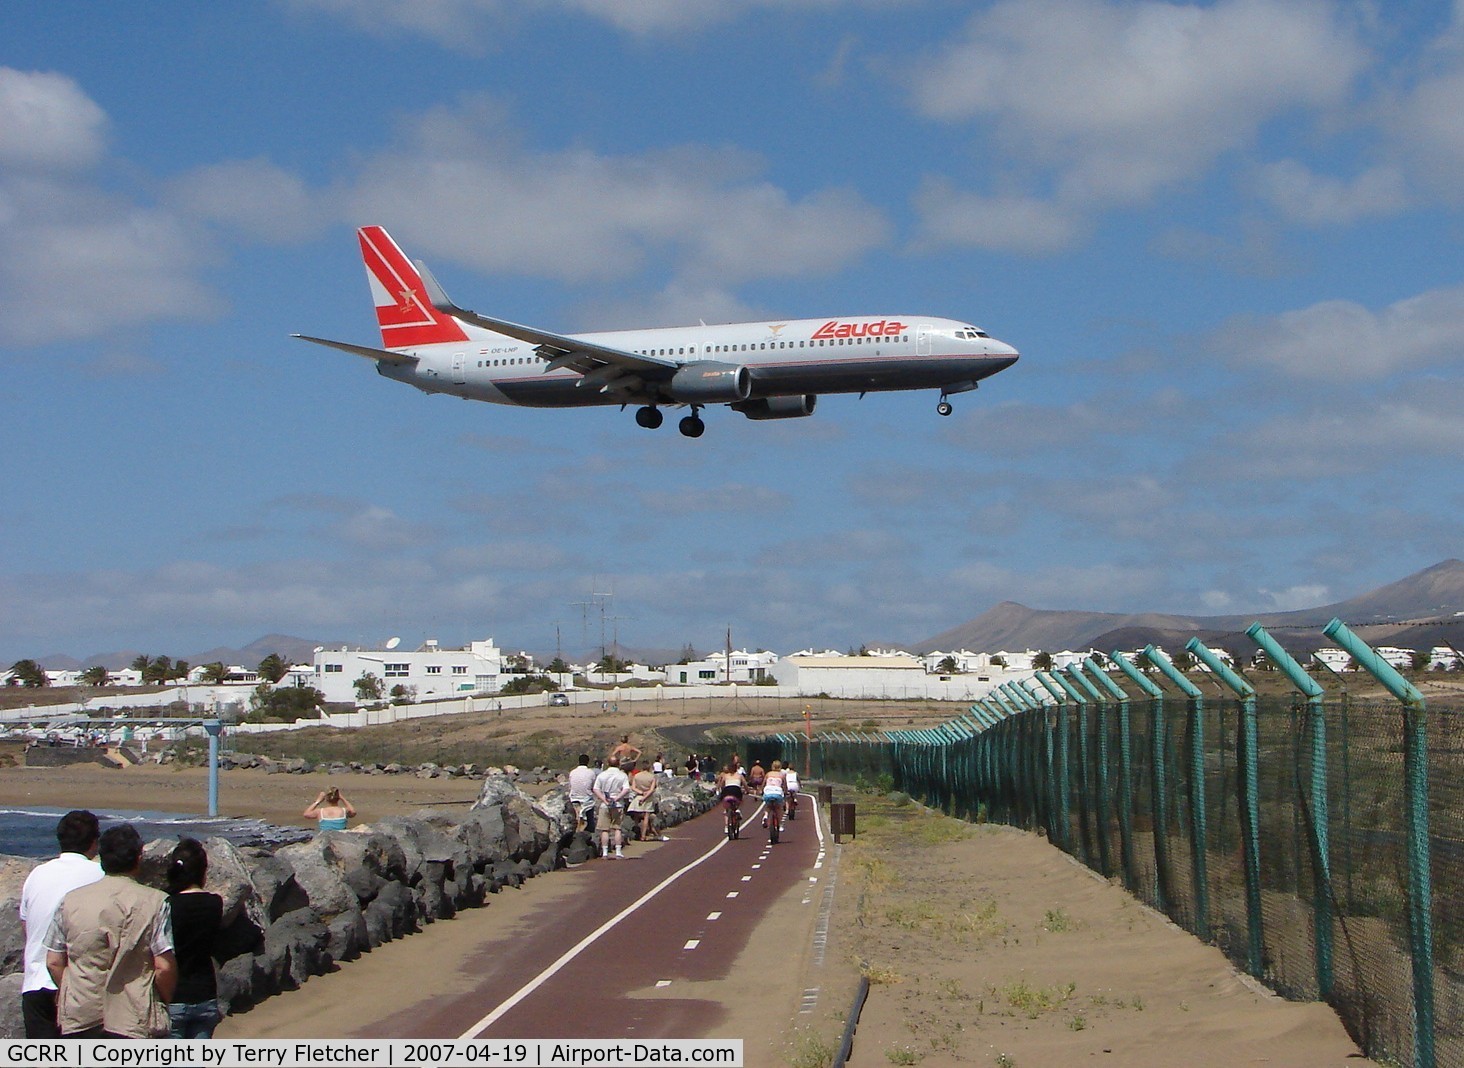 Arrecife Airport (Lanzarote Airport), Arrecife Spain (GCRR) - Lanzarote is a very enthusiast friendly airport with footpaths around at least half of the airfield perimeter